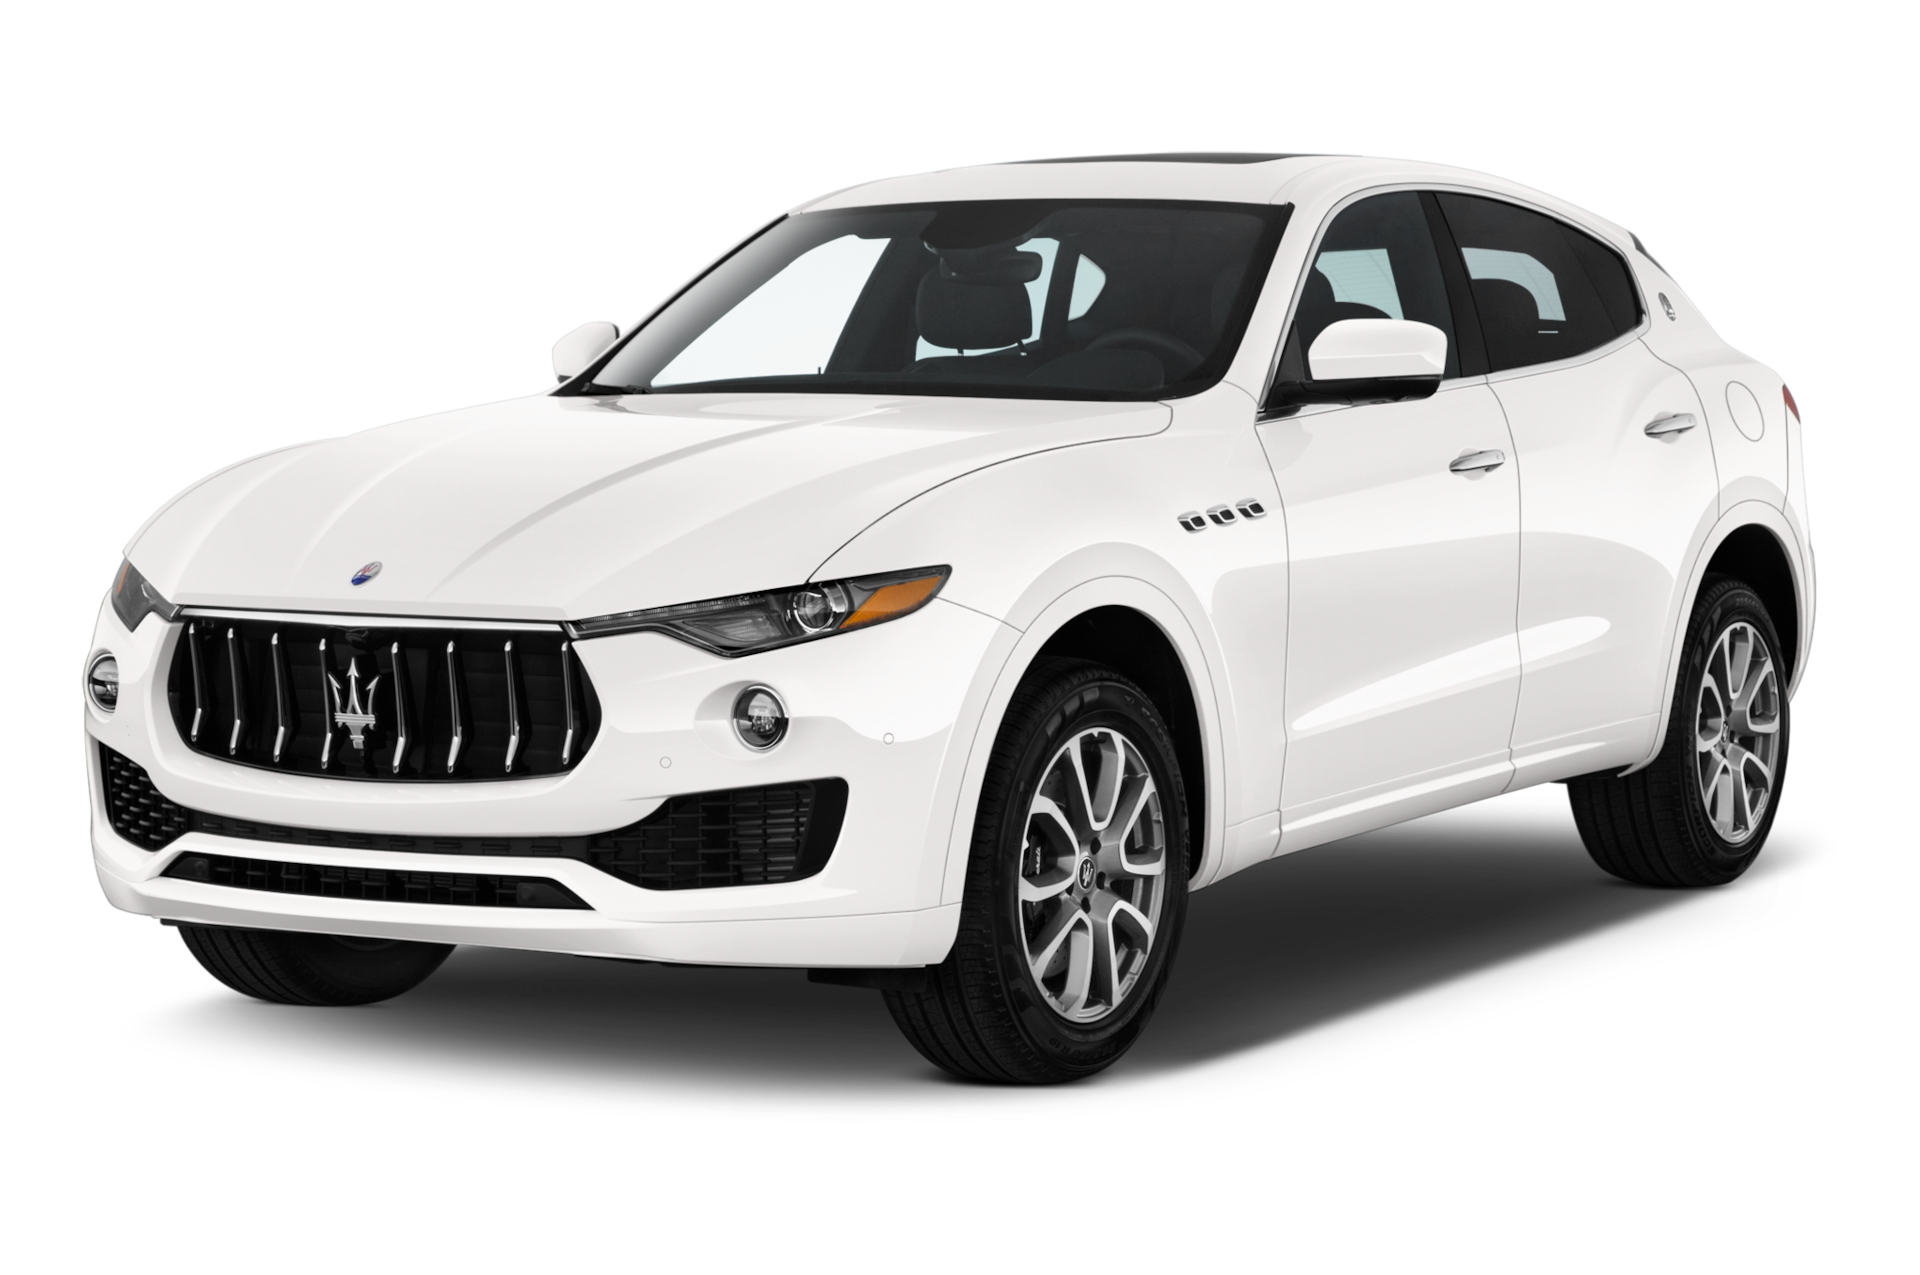 2020 Maserati Levante Prices, Reviews, and Photos - MotorTrend